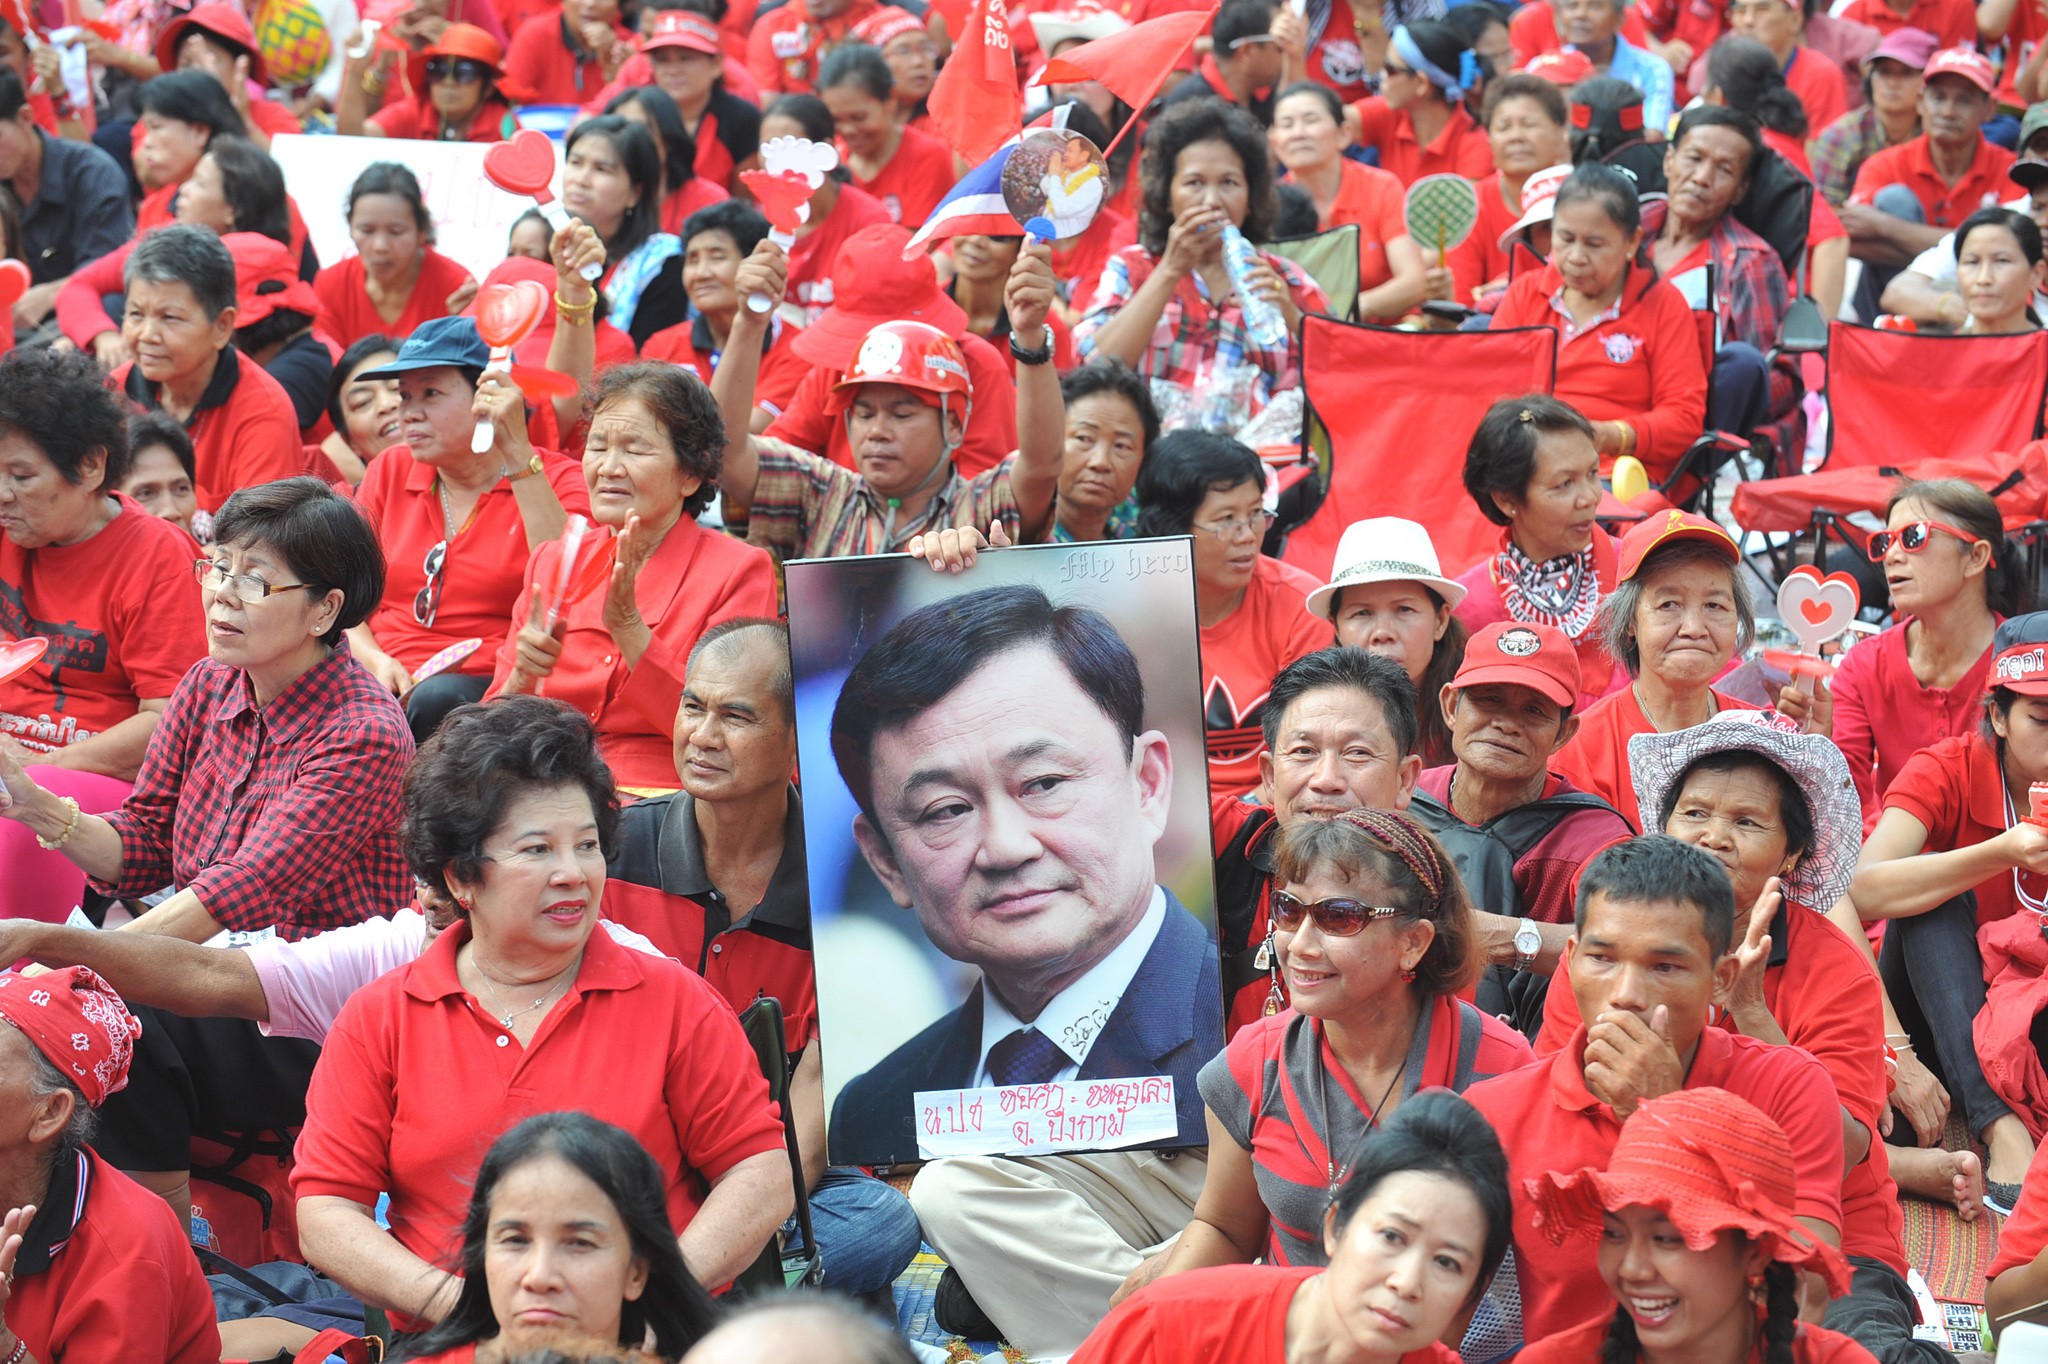 Supporters of former premier Thaksin Shinawatra during a rally in Bangkok in 2010. Photo: Xinhua